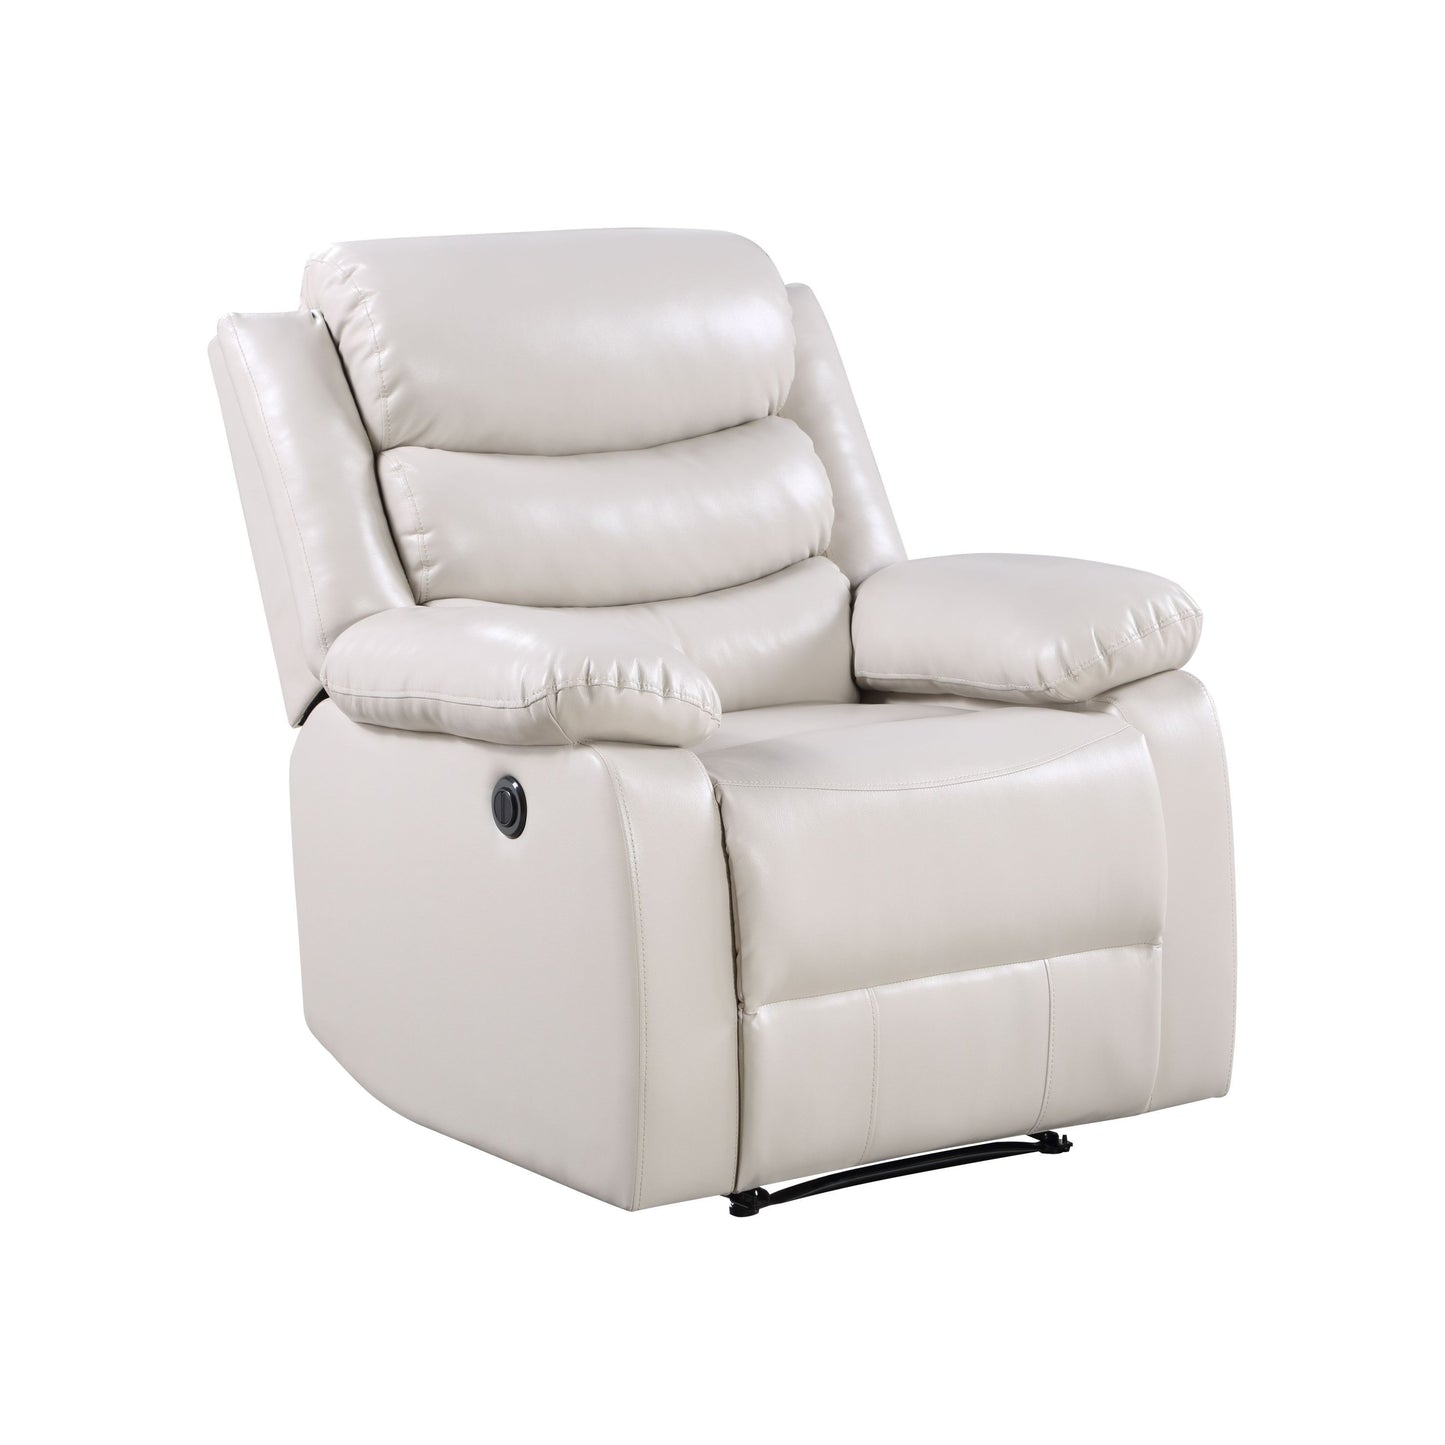 Eilbra Power Recliner in Beige Faux Leather - Ultimate Relaxation Recliner